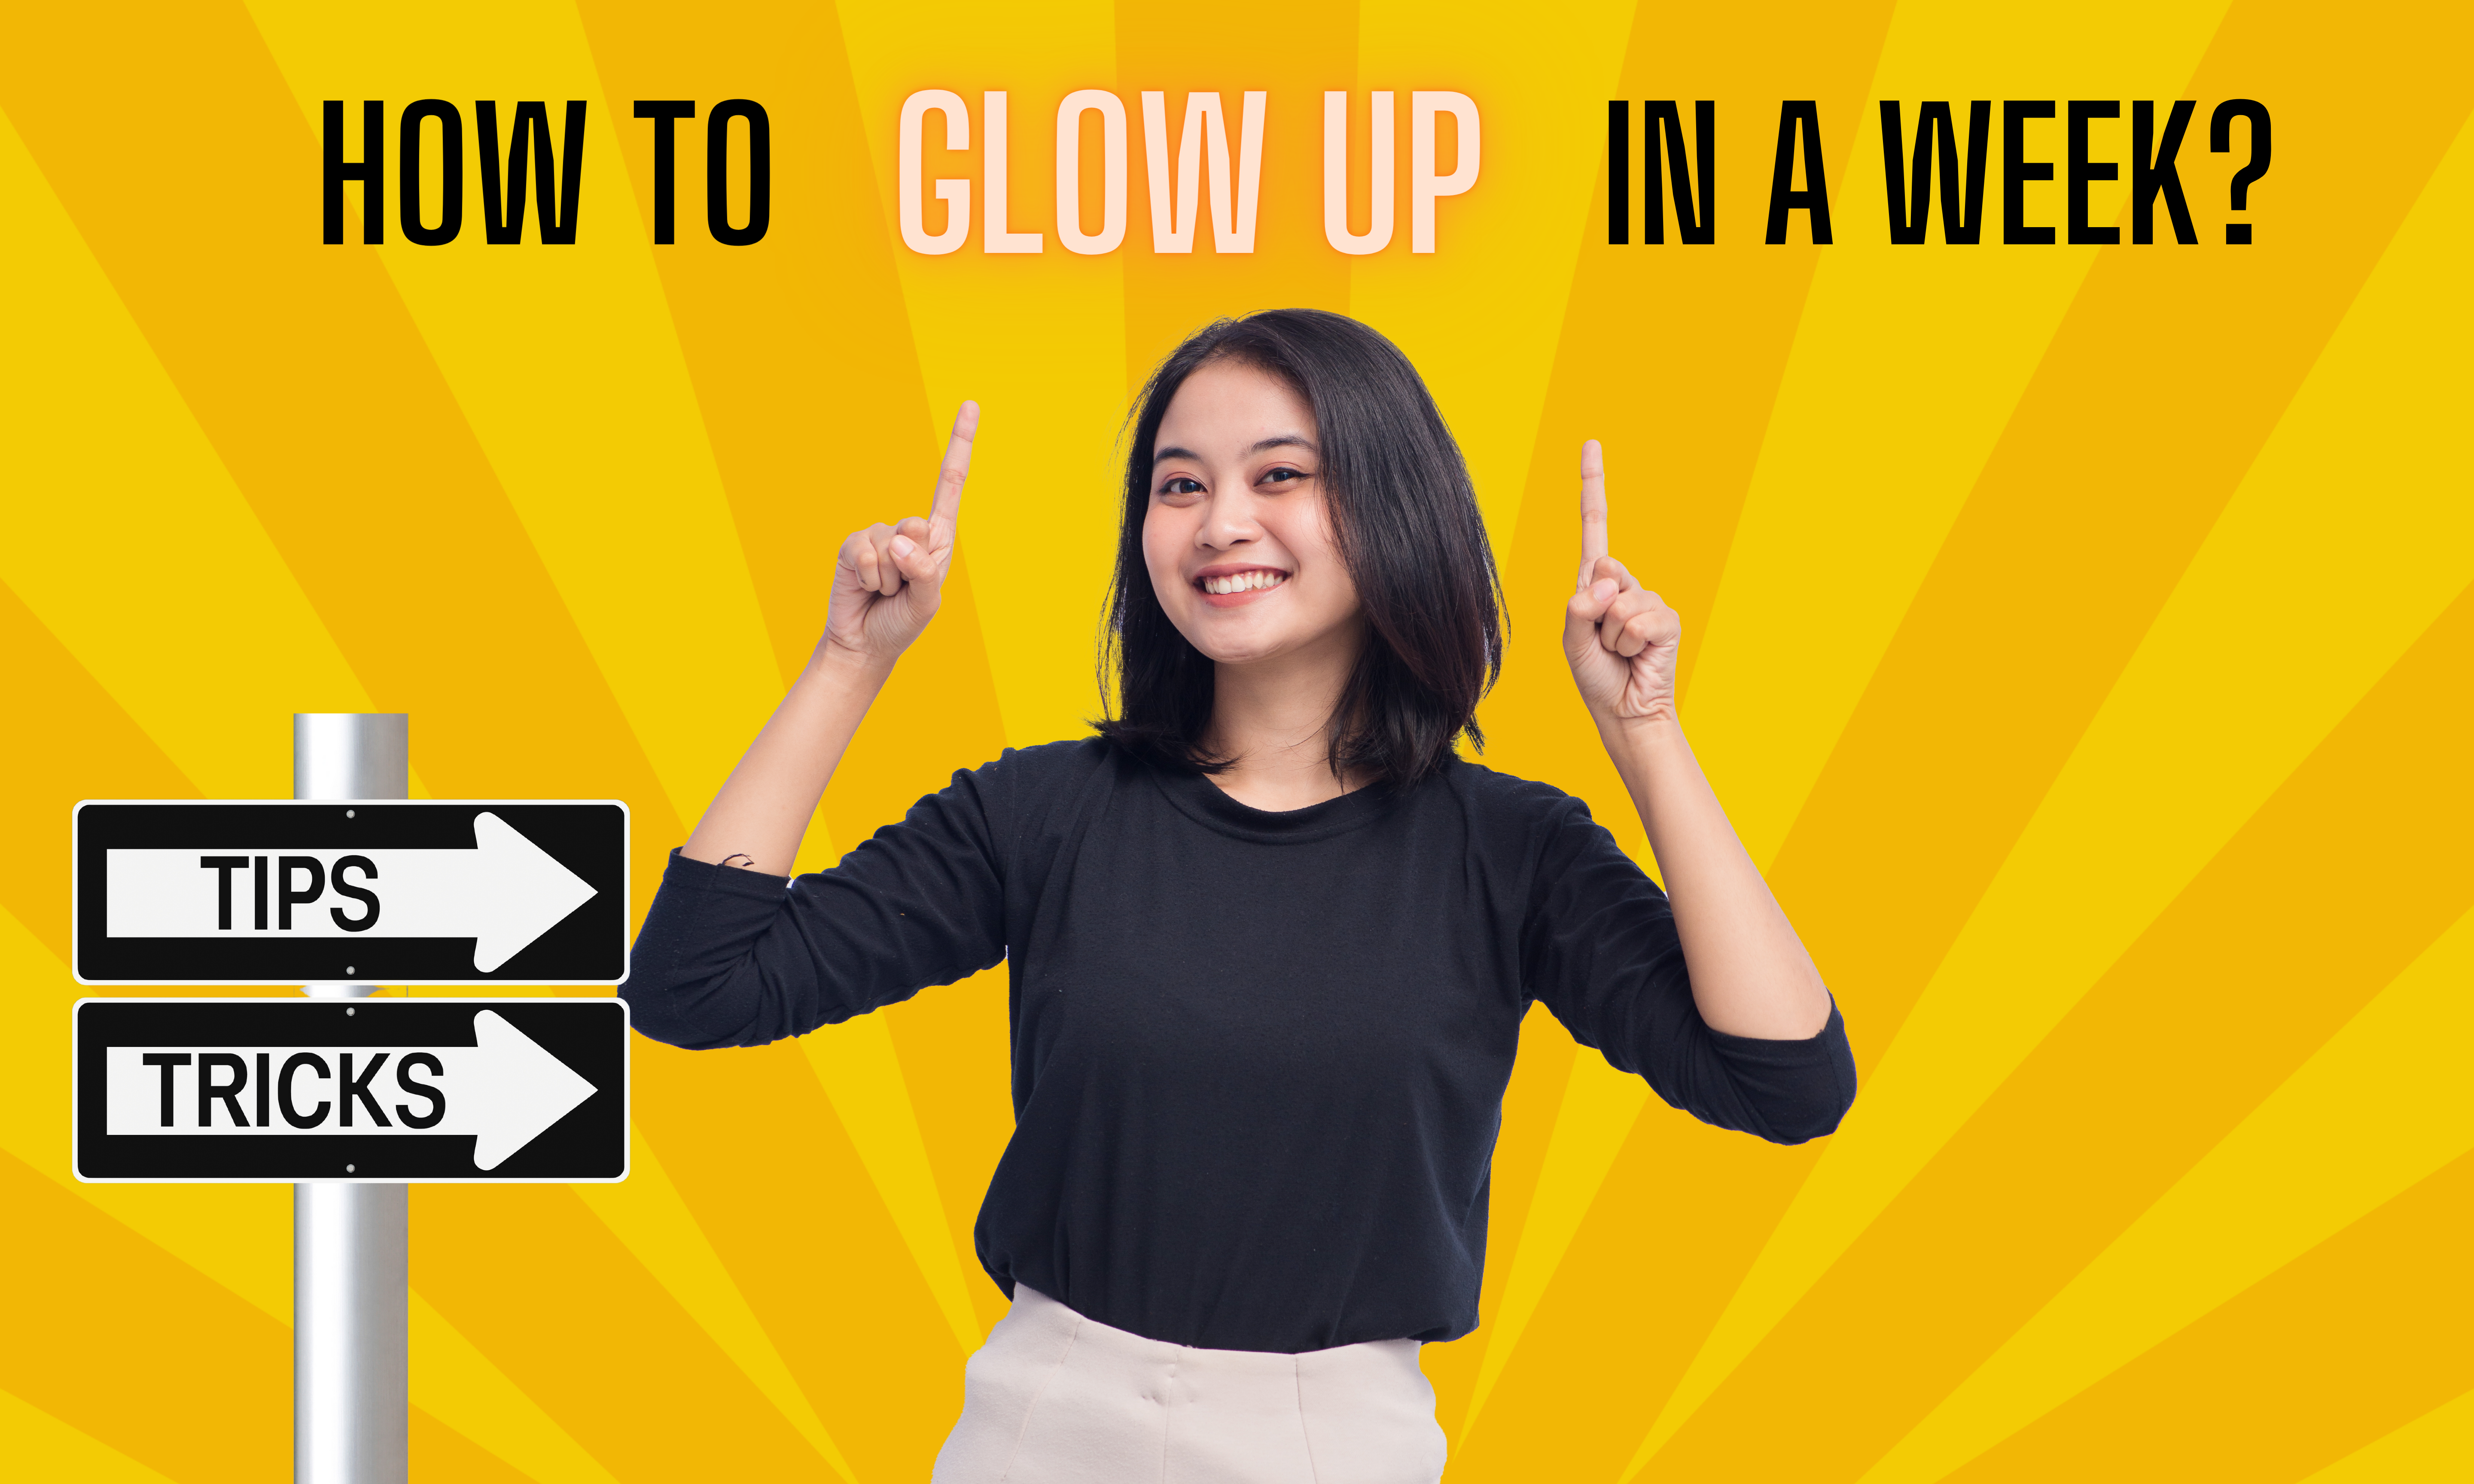 How to Glow Up in a Week? Glow Up Tips and Tricks